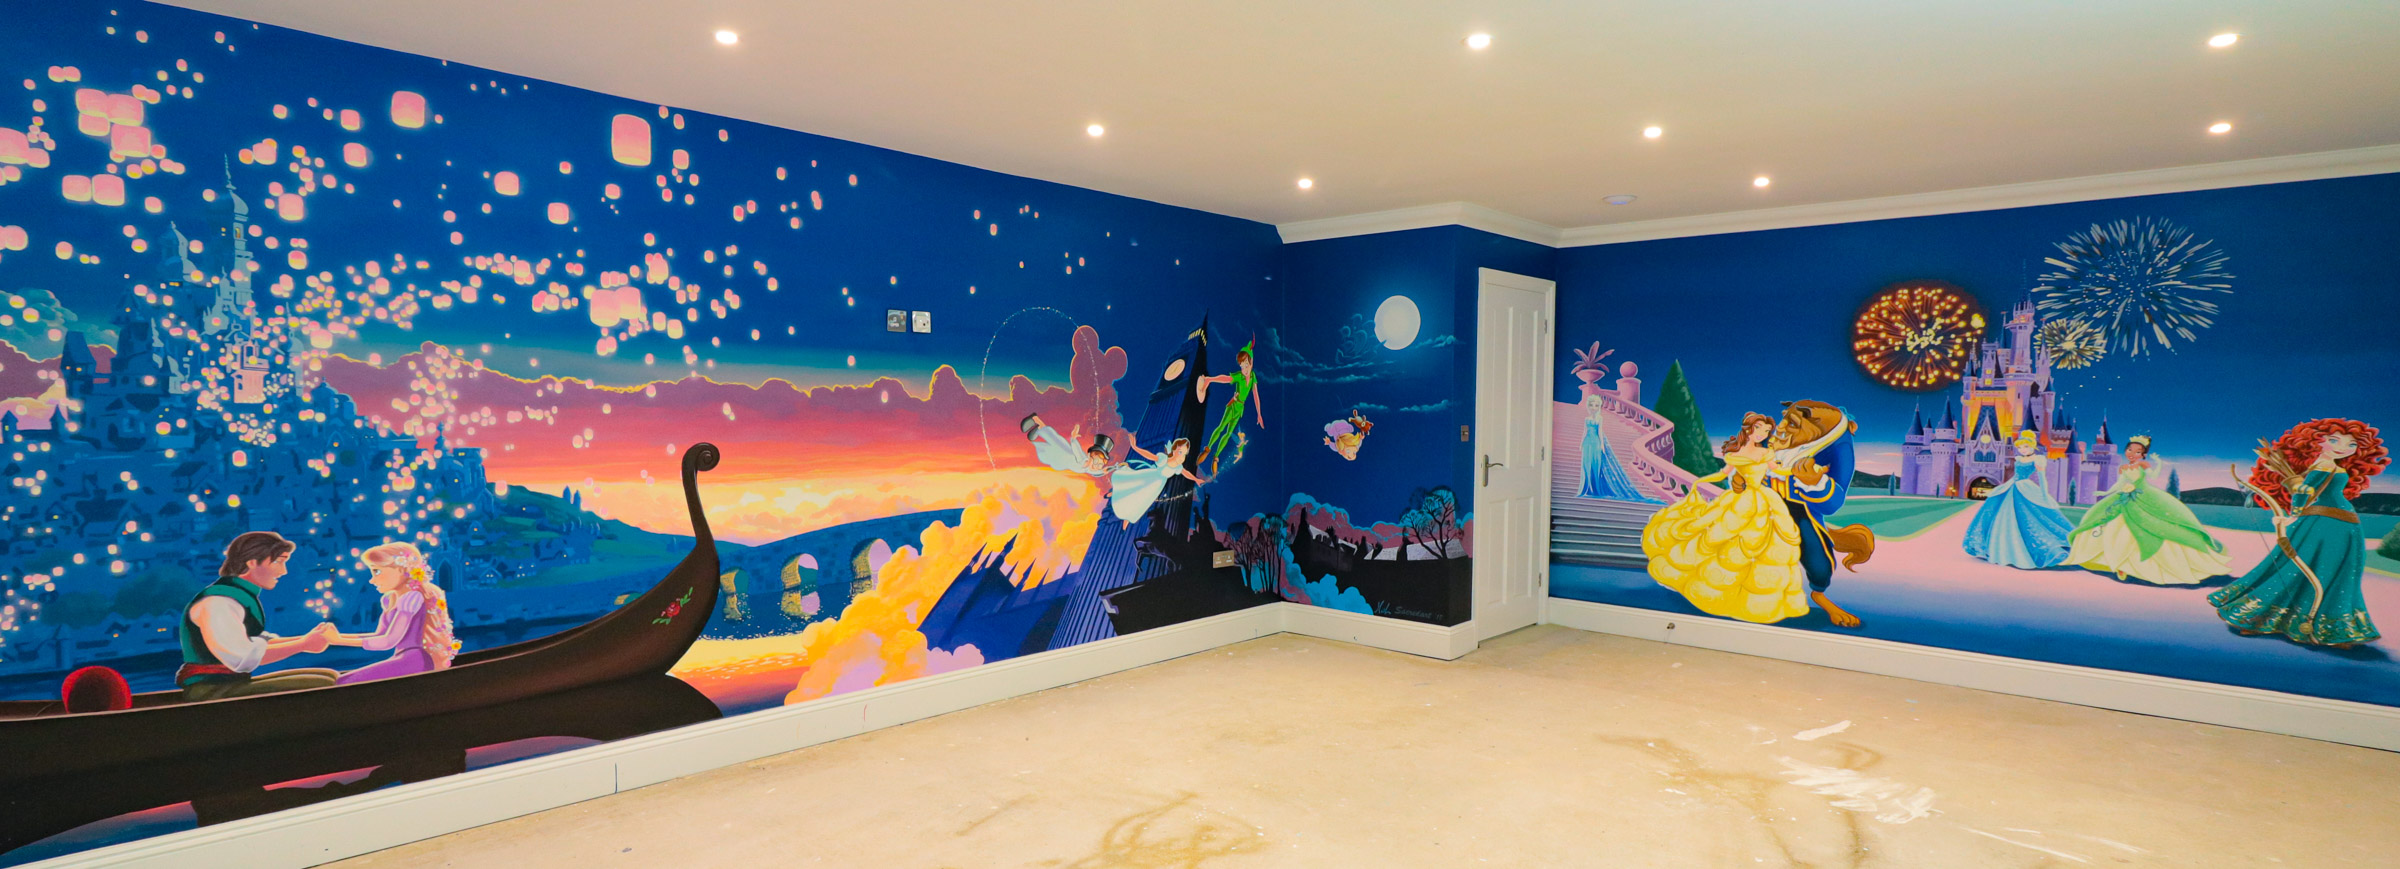 playroom mural, featuring Jungle book characters Mowgli Bagheera and Baloo, plus Lilo and Stitch, the Little Mermaid, Woody and Buzz Lightyear and more details in an expansive Moana backdrop